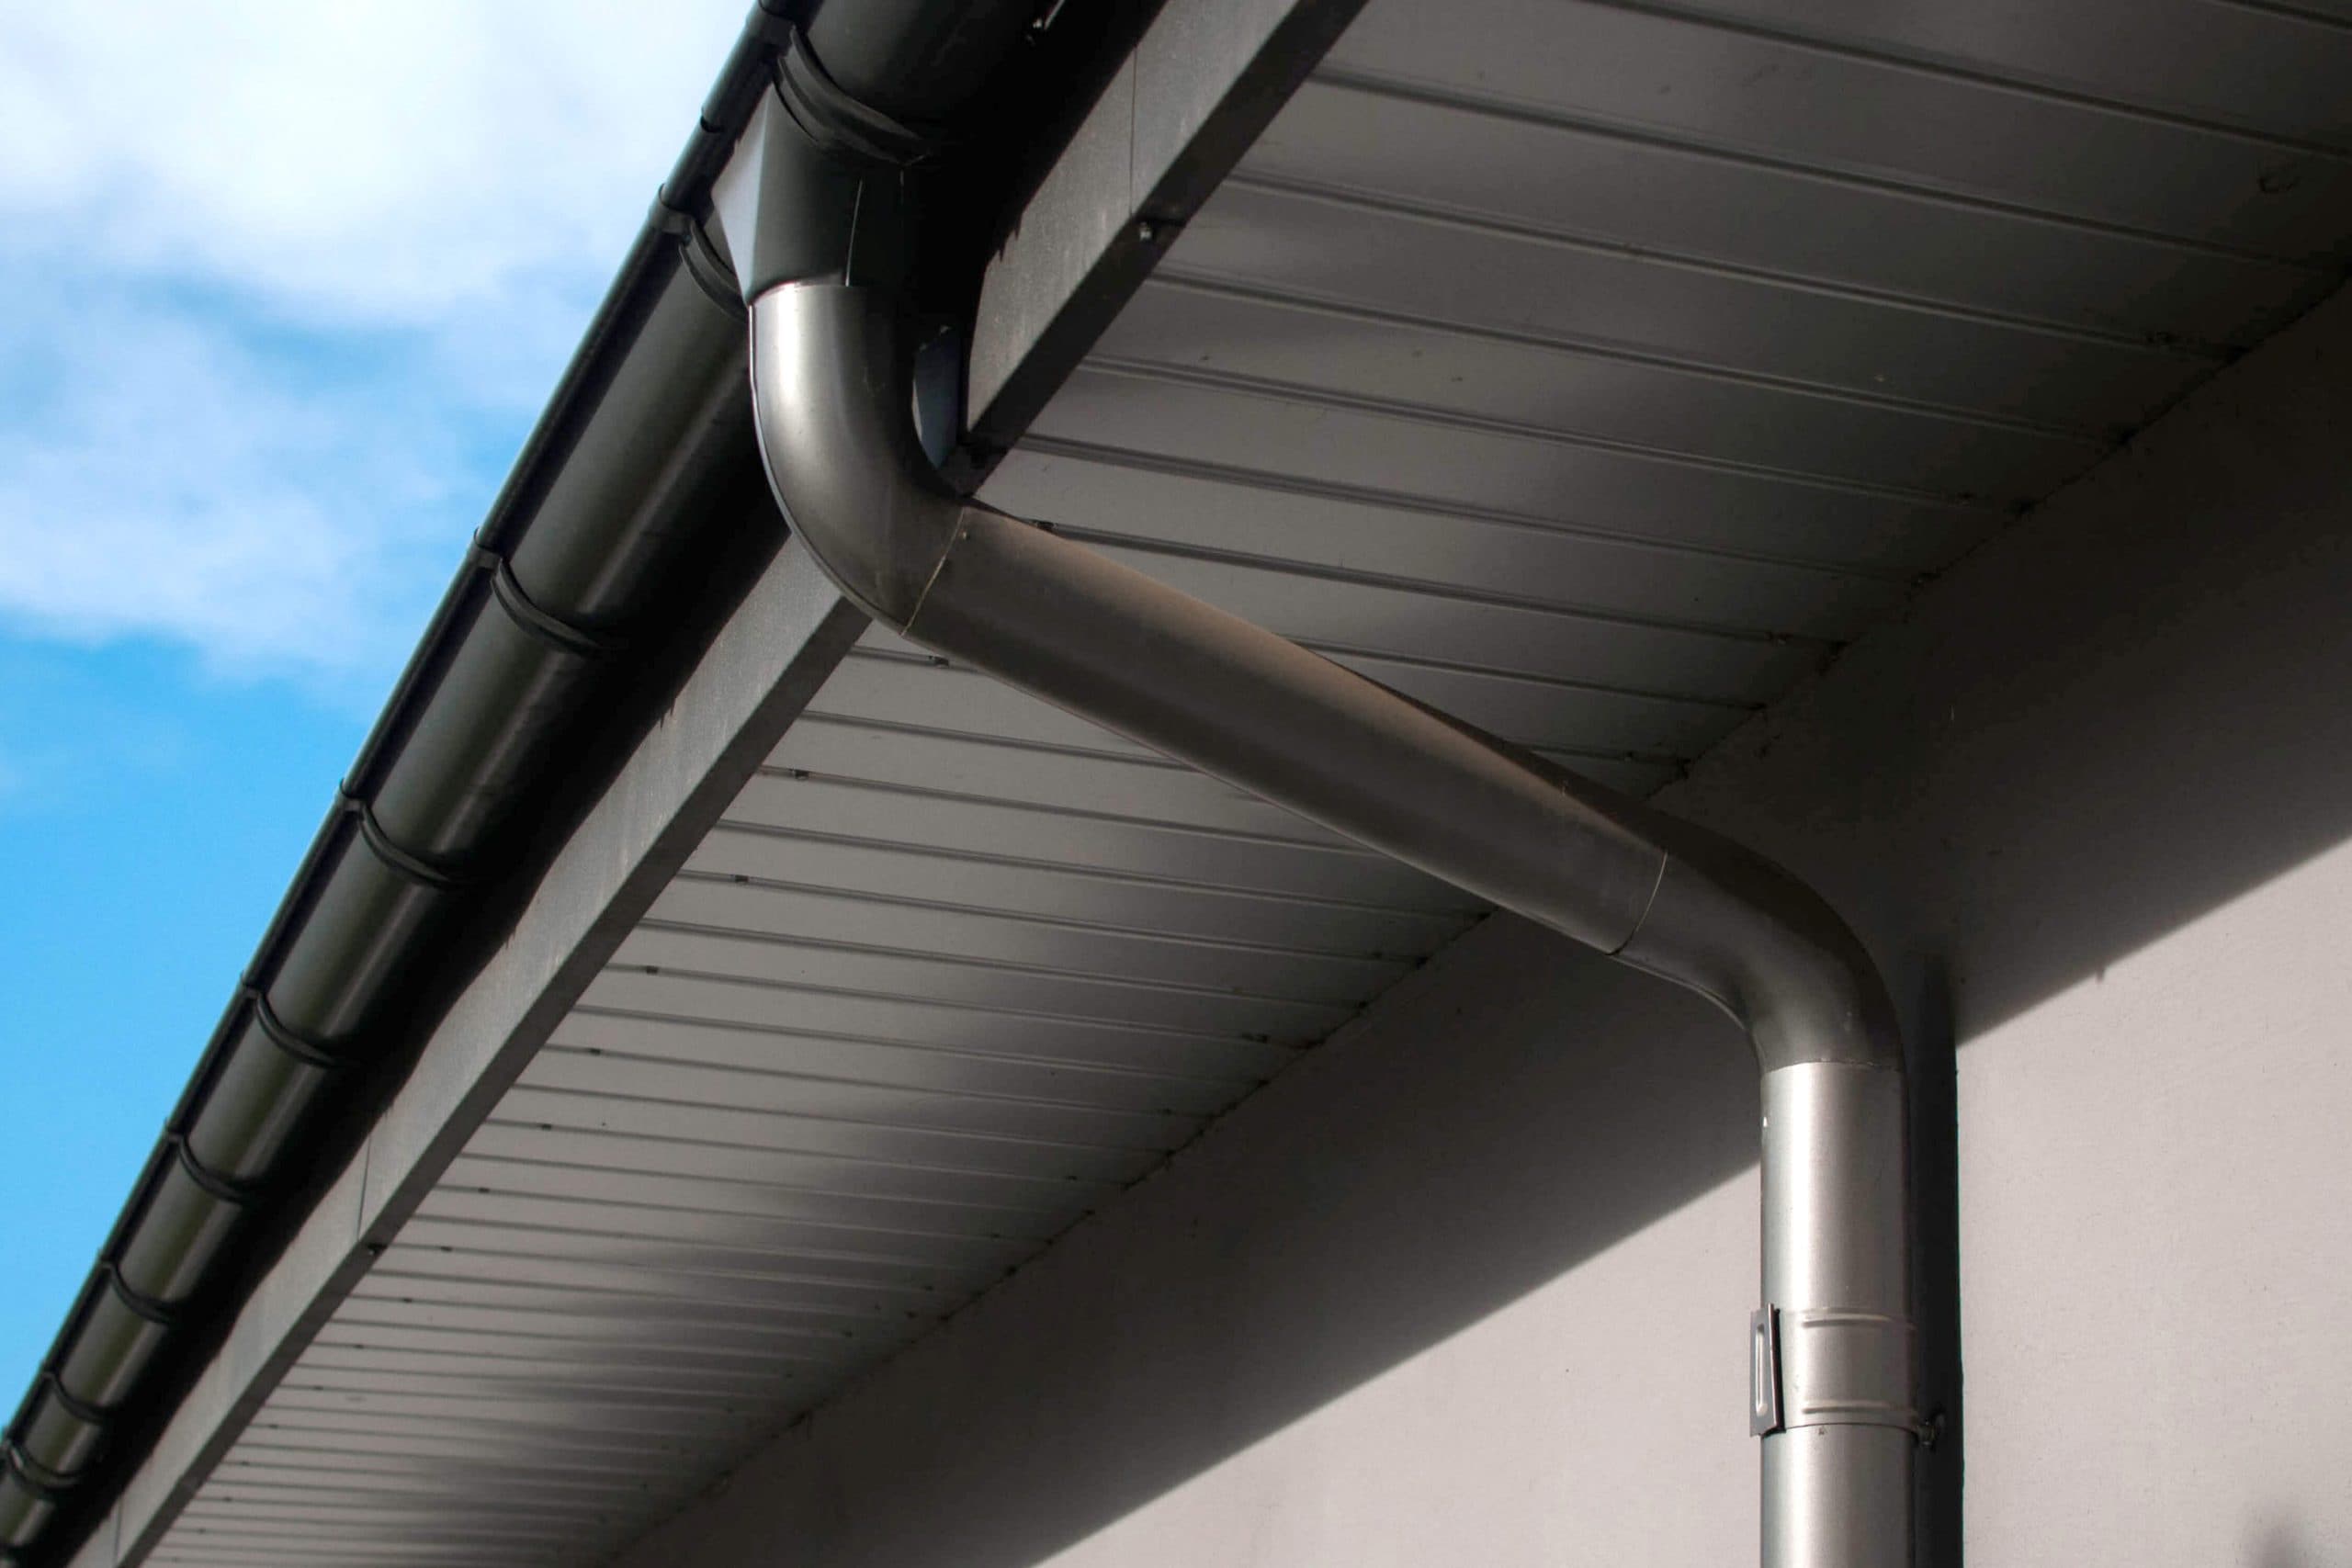 Corrosion-resistant galvanized gutters installed on a commercial building in Roanoke